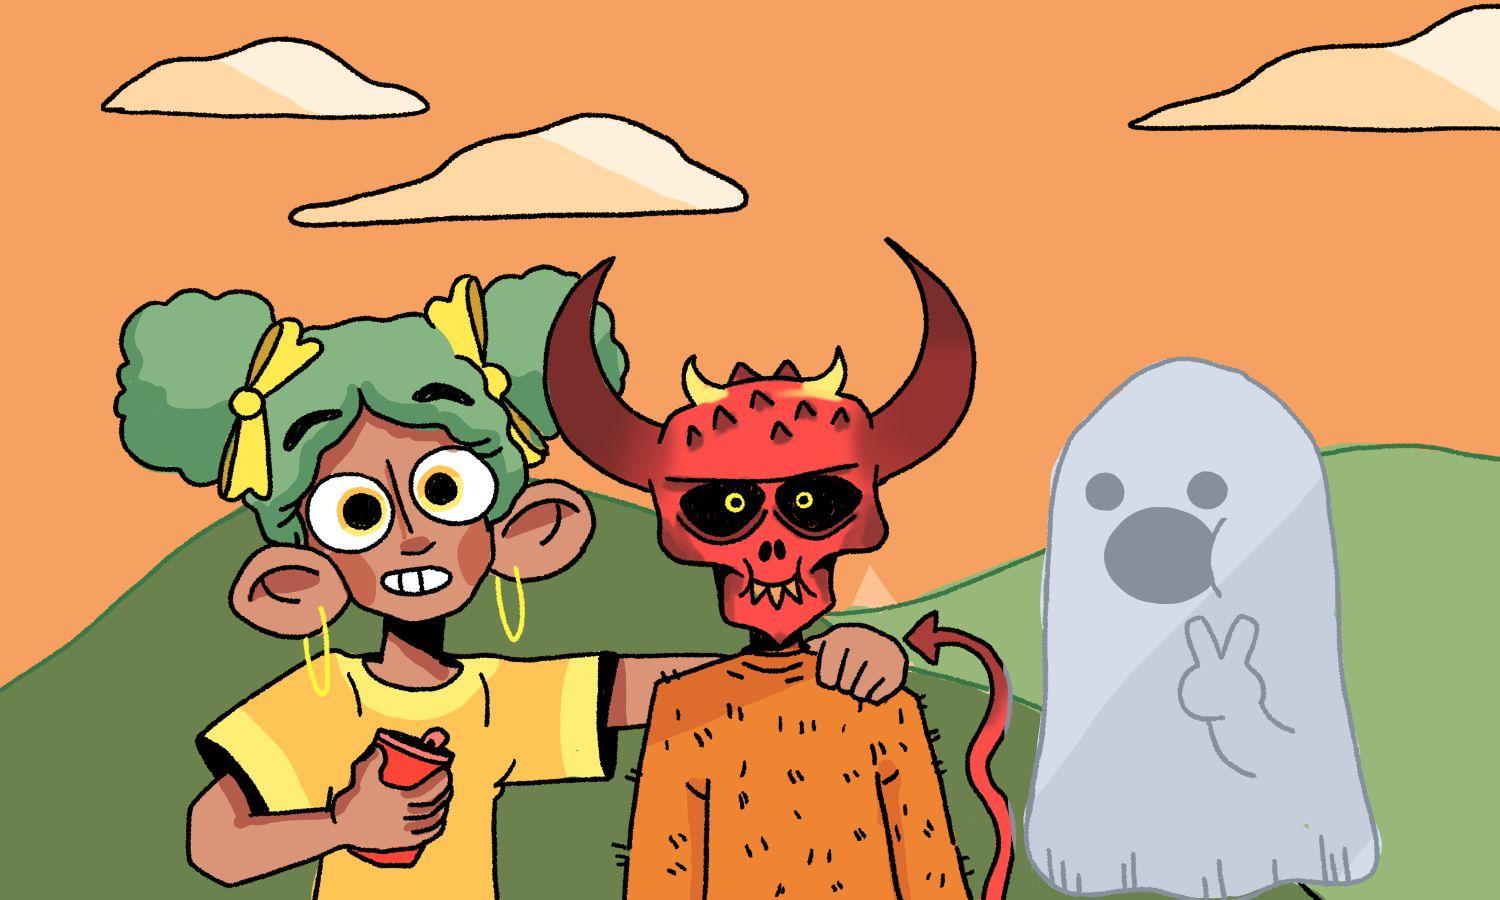 Illustration of a group of friends, one being a person, the second a demon, and the third a ghost holding up a peace sign